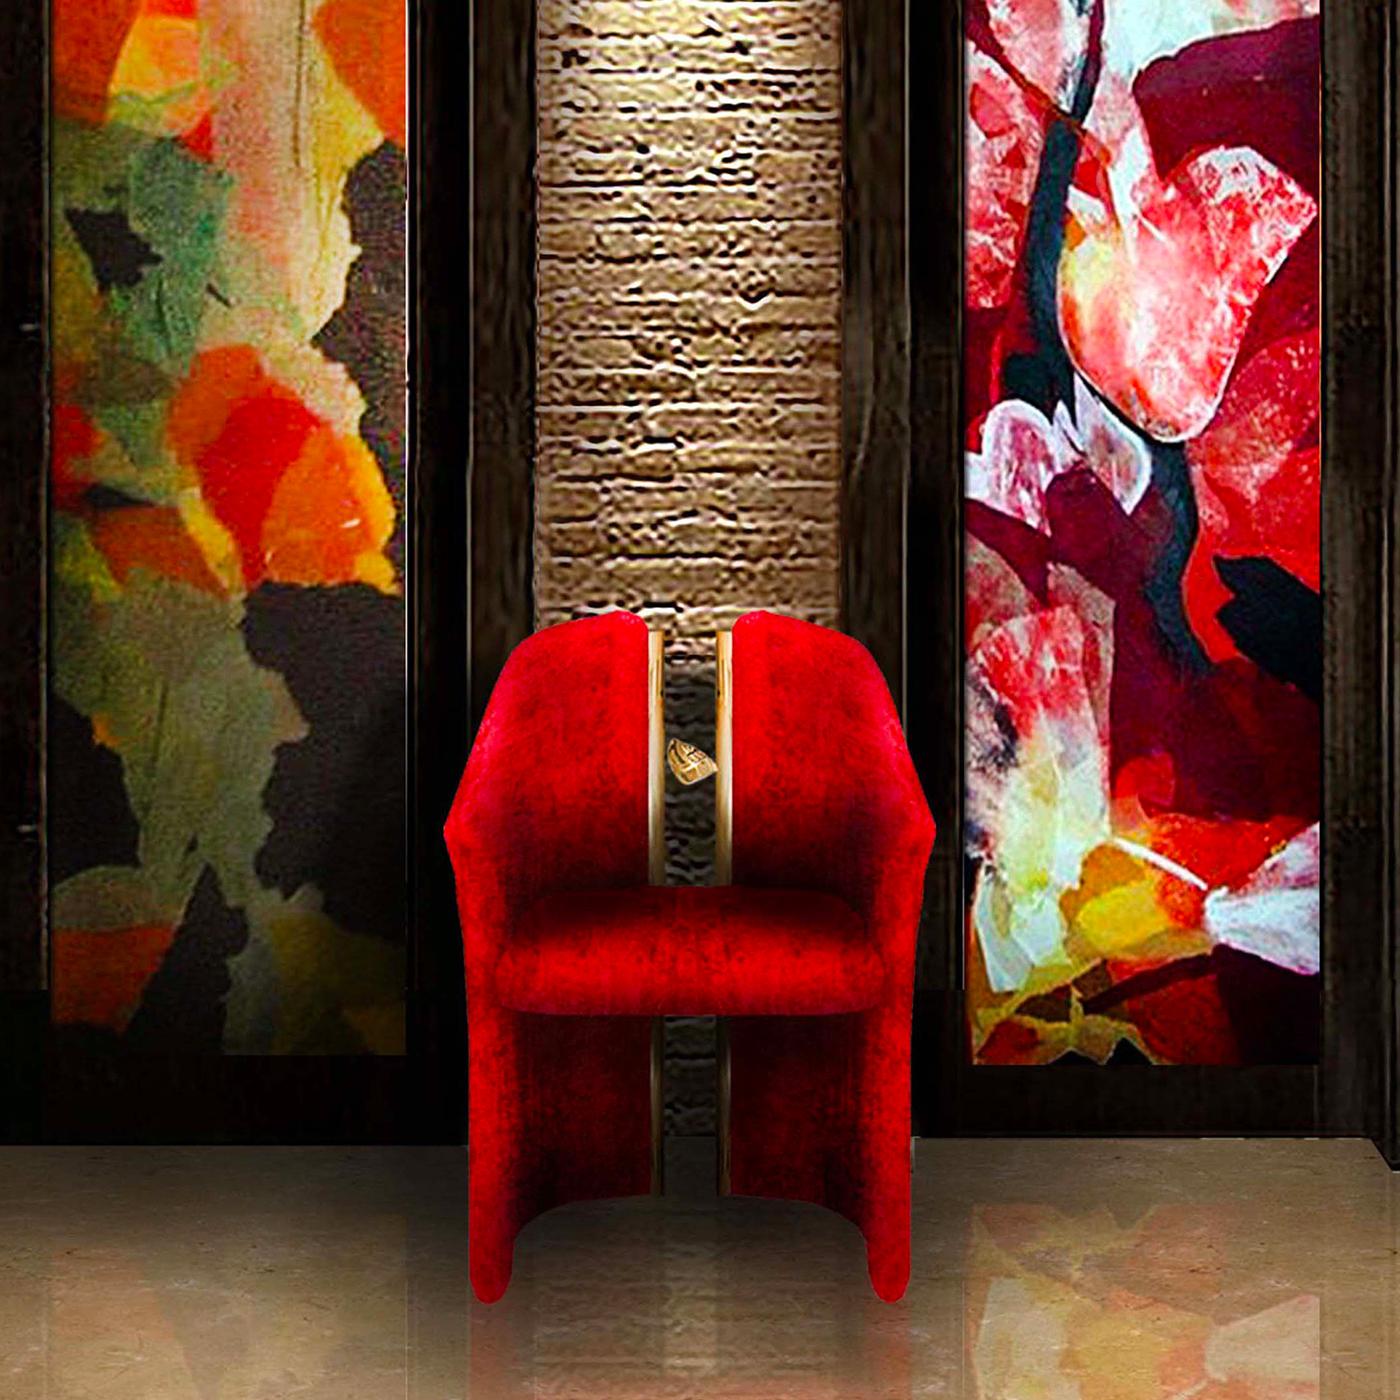 This stunning armchair is a work of functional art that will make a statement in a modern living room or eclectic dining room. Its poplar frame upholstered in red velvet plays with the harmony between full and empty volumes, creating two separate